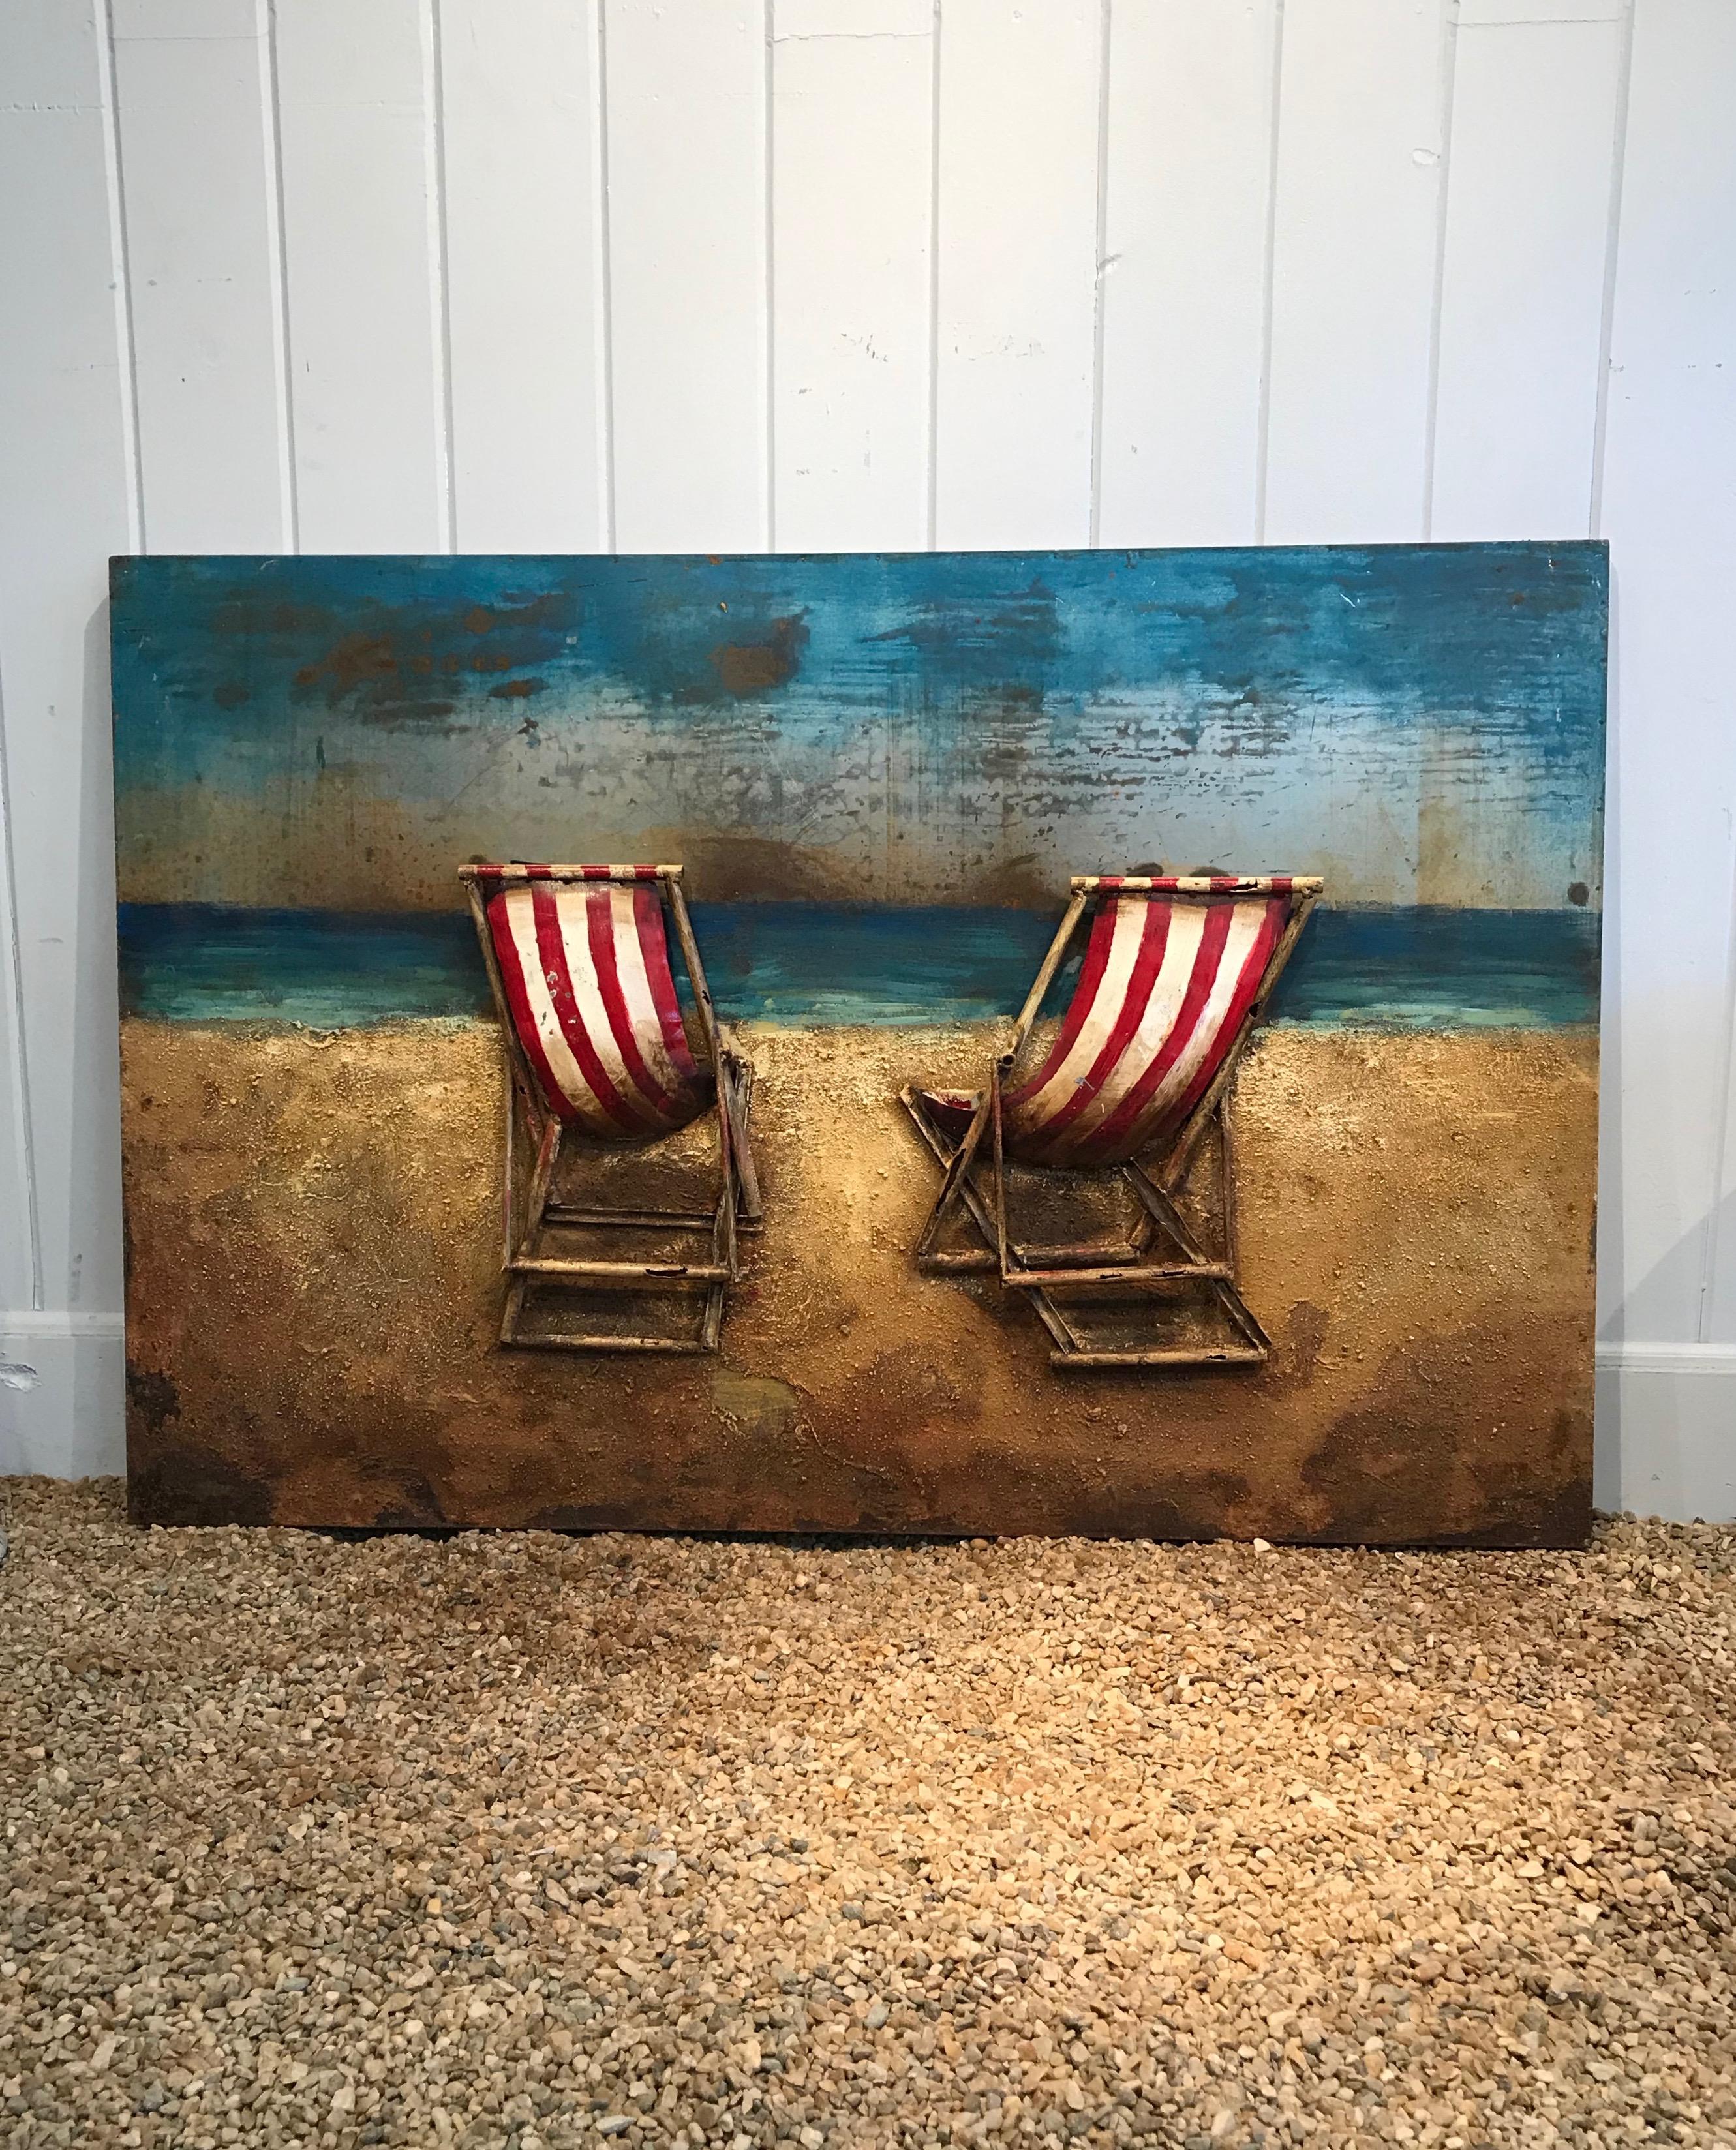 Not our usual fare, but we were completely taken with the uniqueness of this three-dimensional painting with its vibrant colors, realistic depiction of sand and sea, and the striped chairs, which put you smack in the middle of a French plage